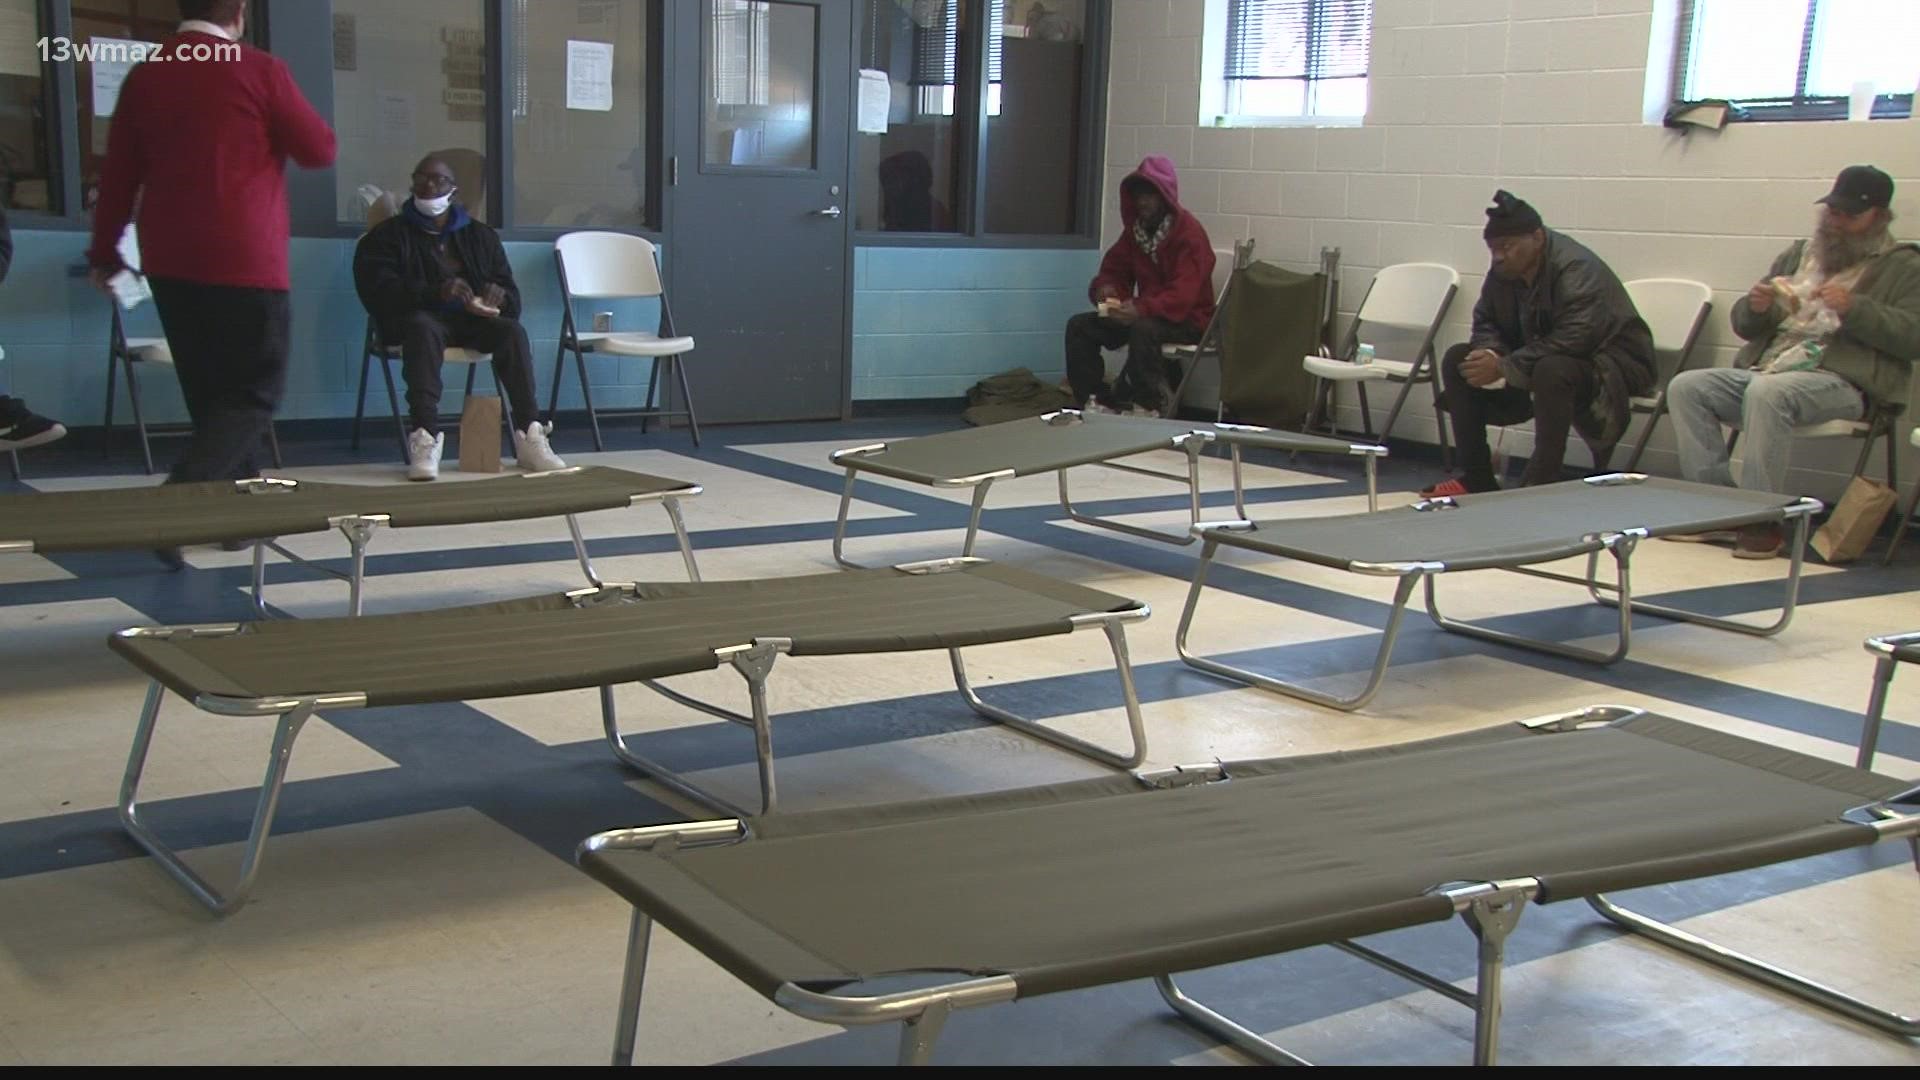 Freezing temperatures can become a matter of safety for the homeless population. In Macon, nonprofit organizations are making sure no one gets left out in the cold.